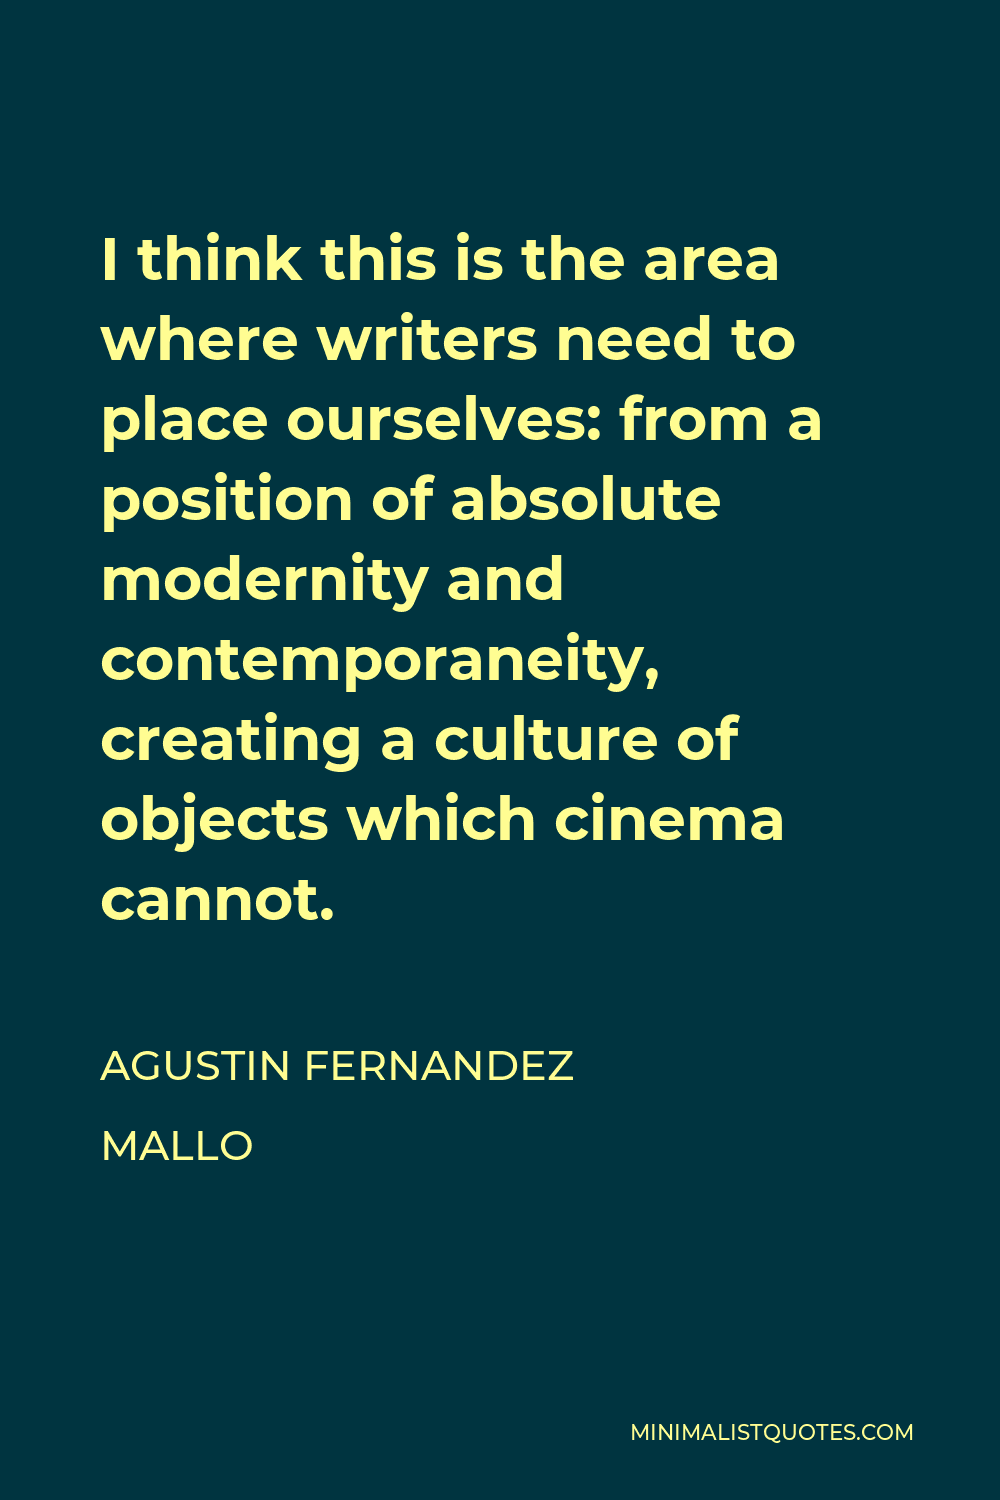 Agustin Fernandez Mallo Quote - I think this is the area where writers need to place ourselves: from a position of absolute modernity and contemporaneity, creating a culture of objects which cinema cannot.